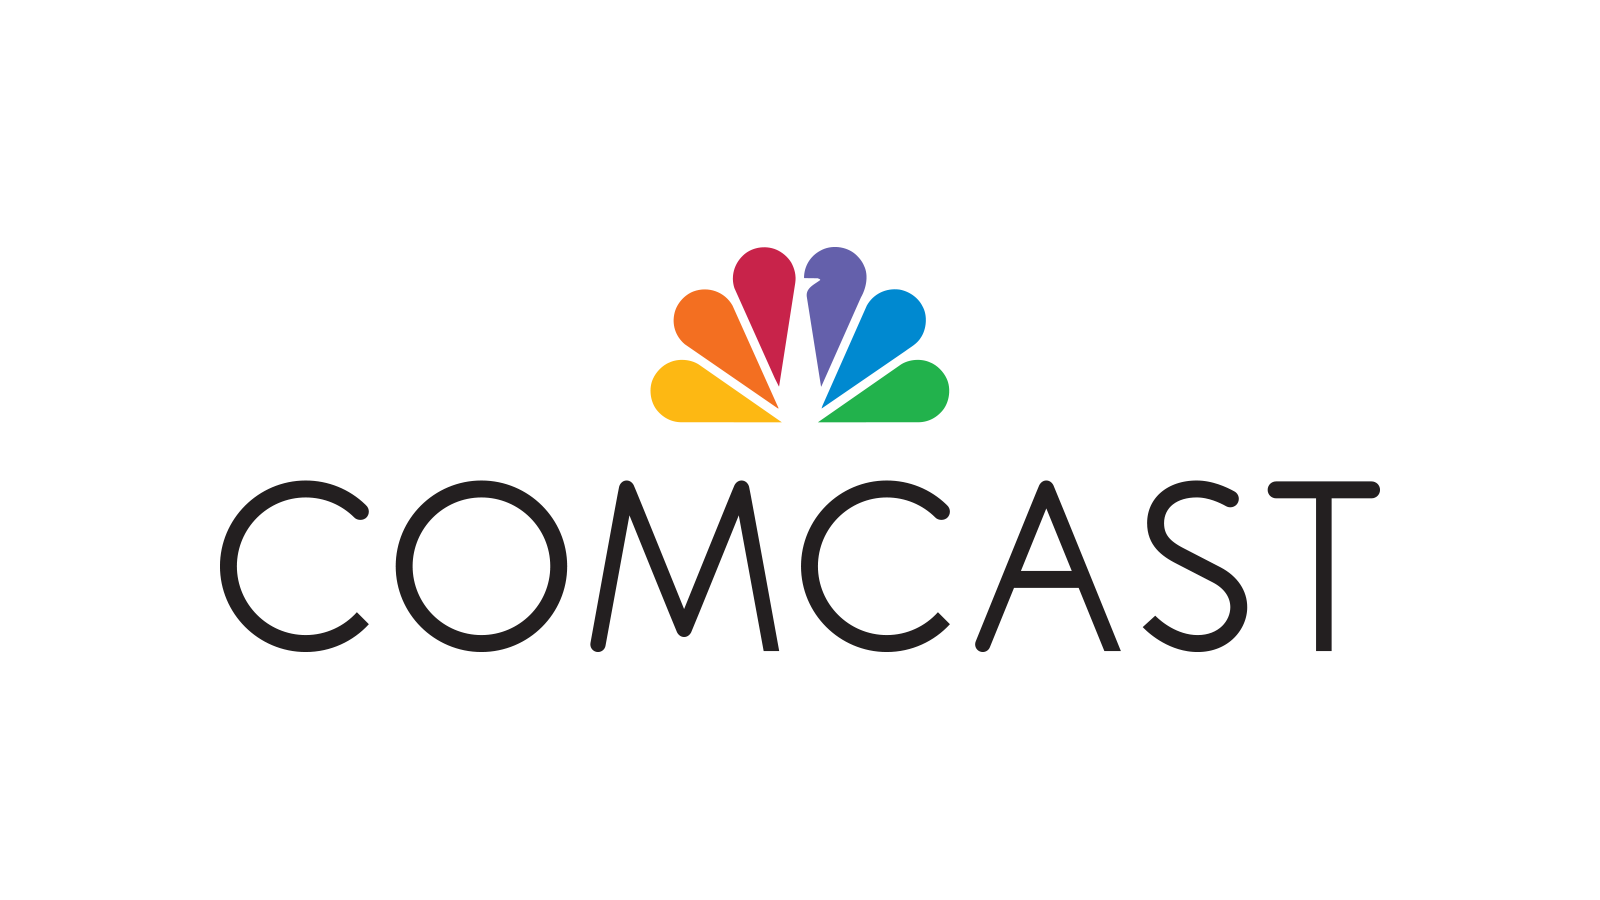 comcast: Internal Communications: Social, Video, Mobile, intranets | Chicago 